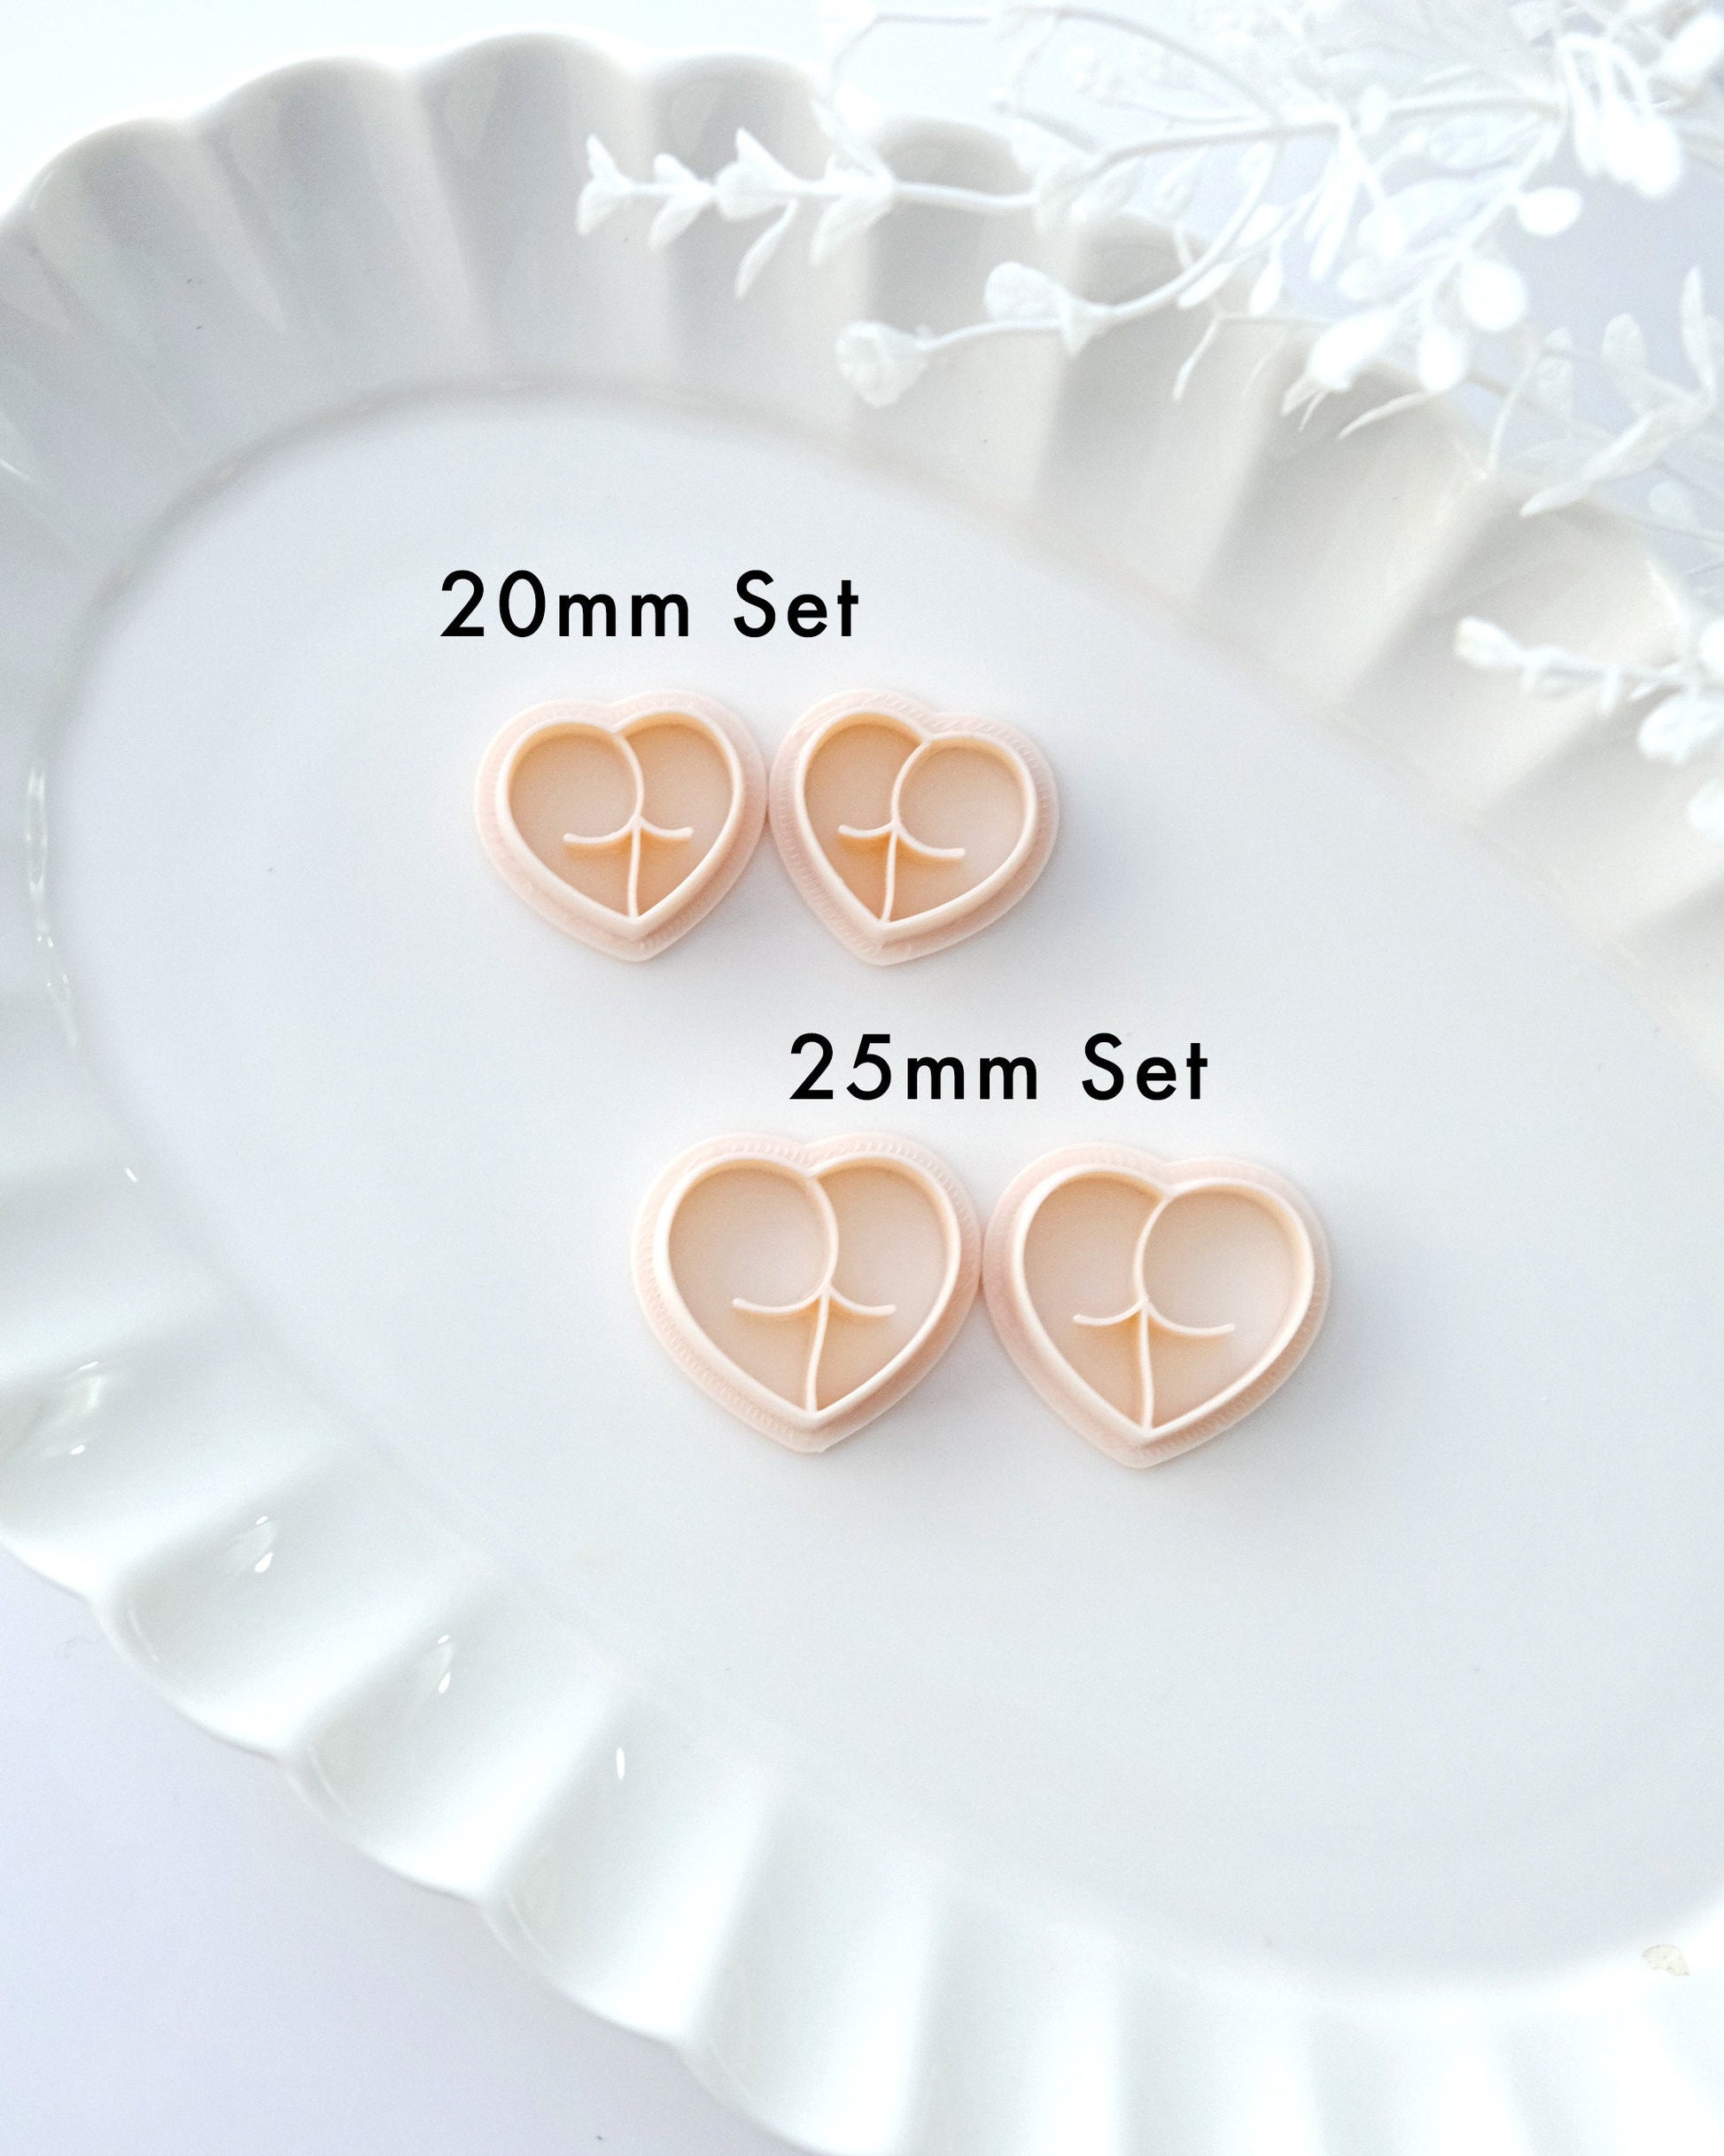 Sacred Heart Polymer Clay Cutter Set